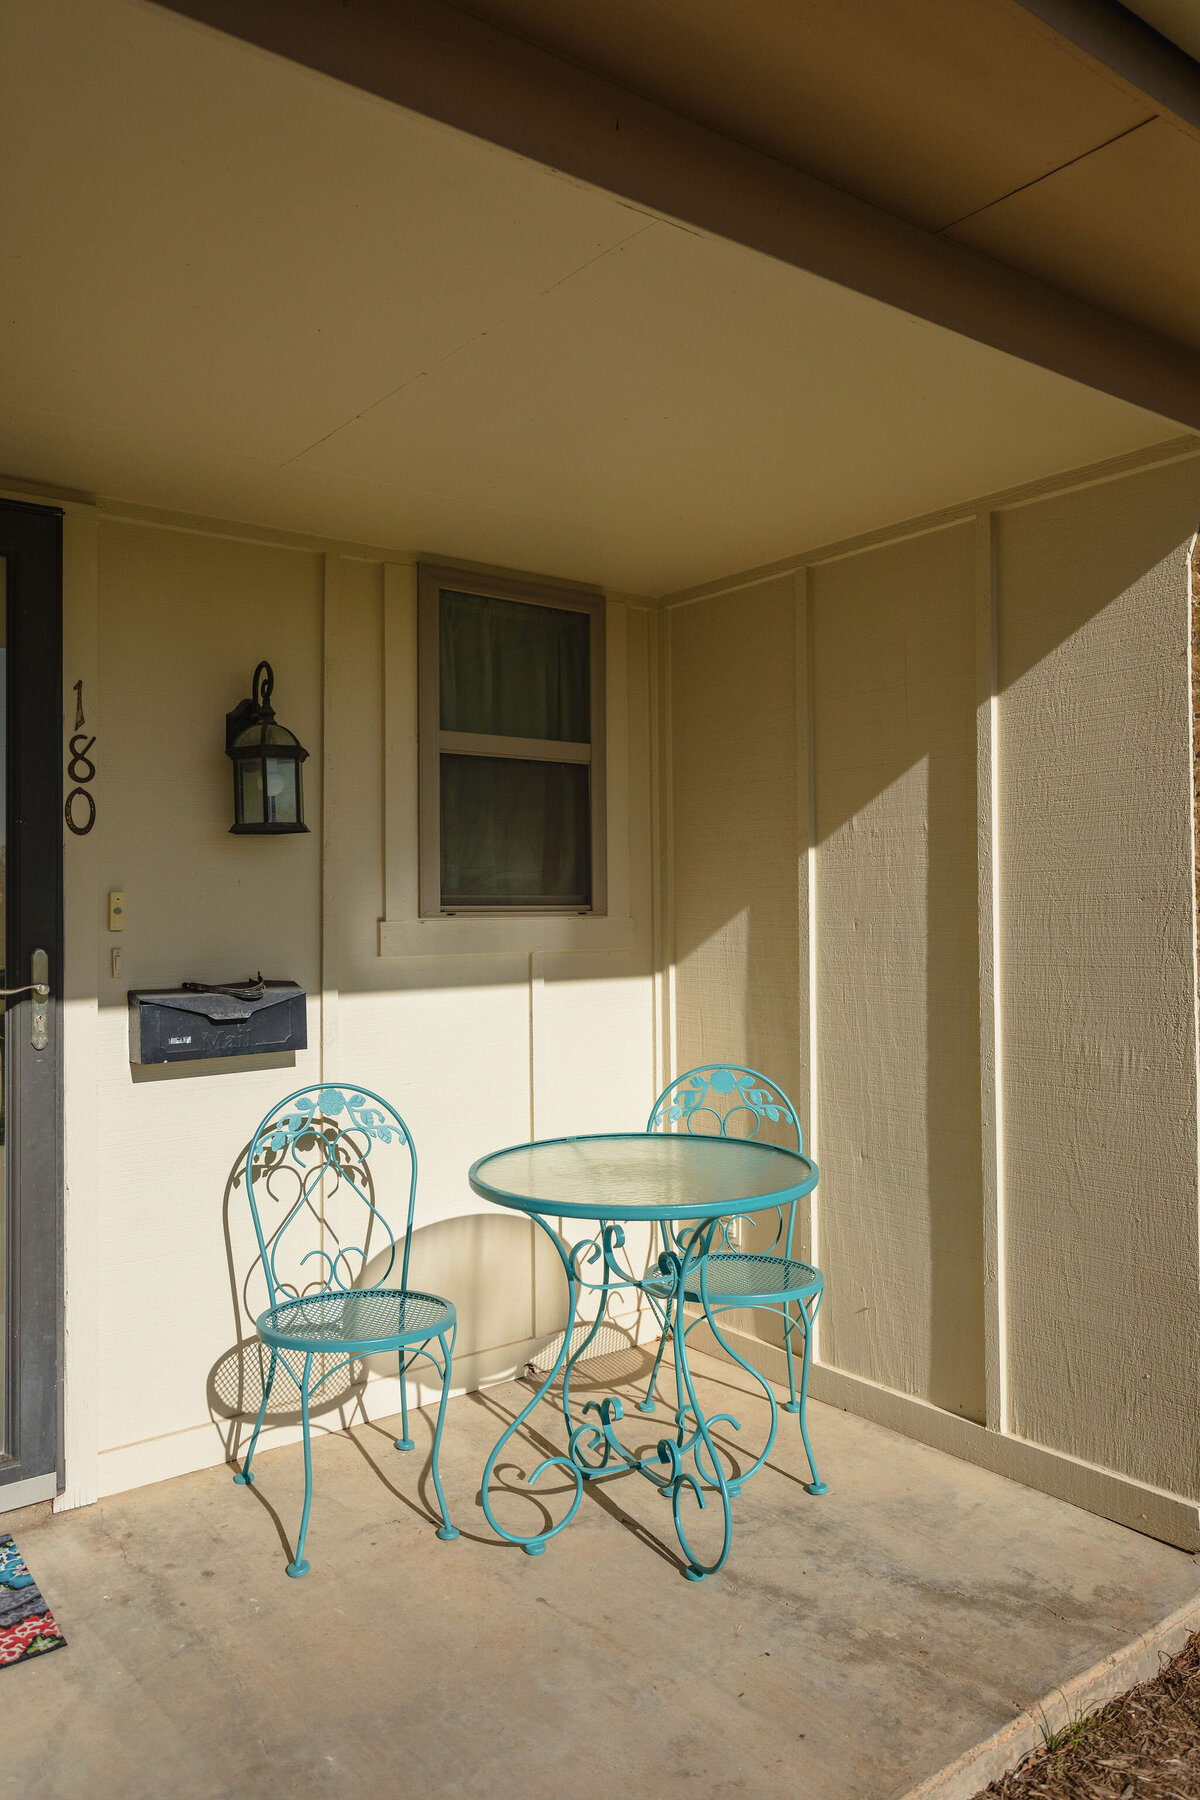 Patio table that seats two at this 2-bedroom, 2-bathroom lakeside vacation rental home for 6 guests on Tradinghouse Lake with privacy access to a fishing dock and boat launch pad, ping pong table, gazebo, free wifi and free parking in Waco, TX.